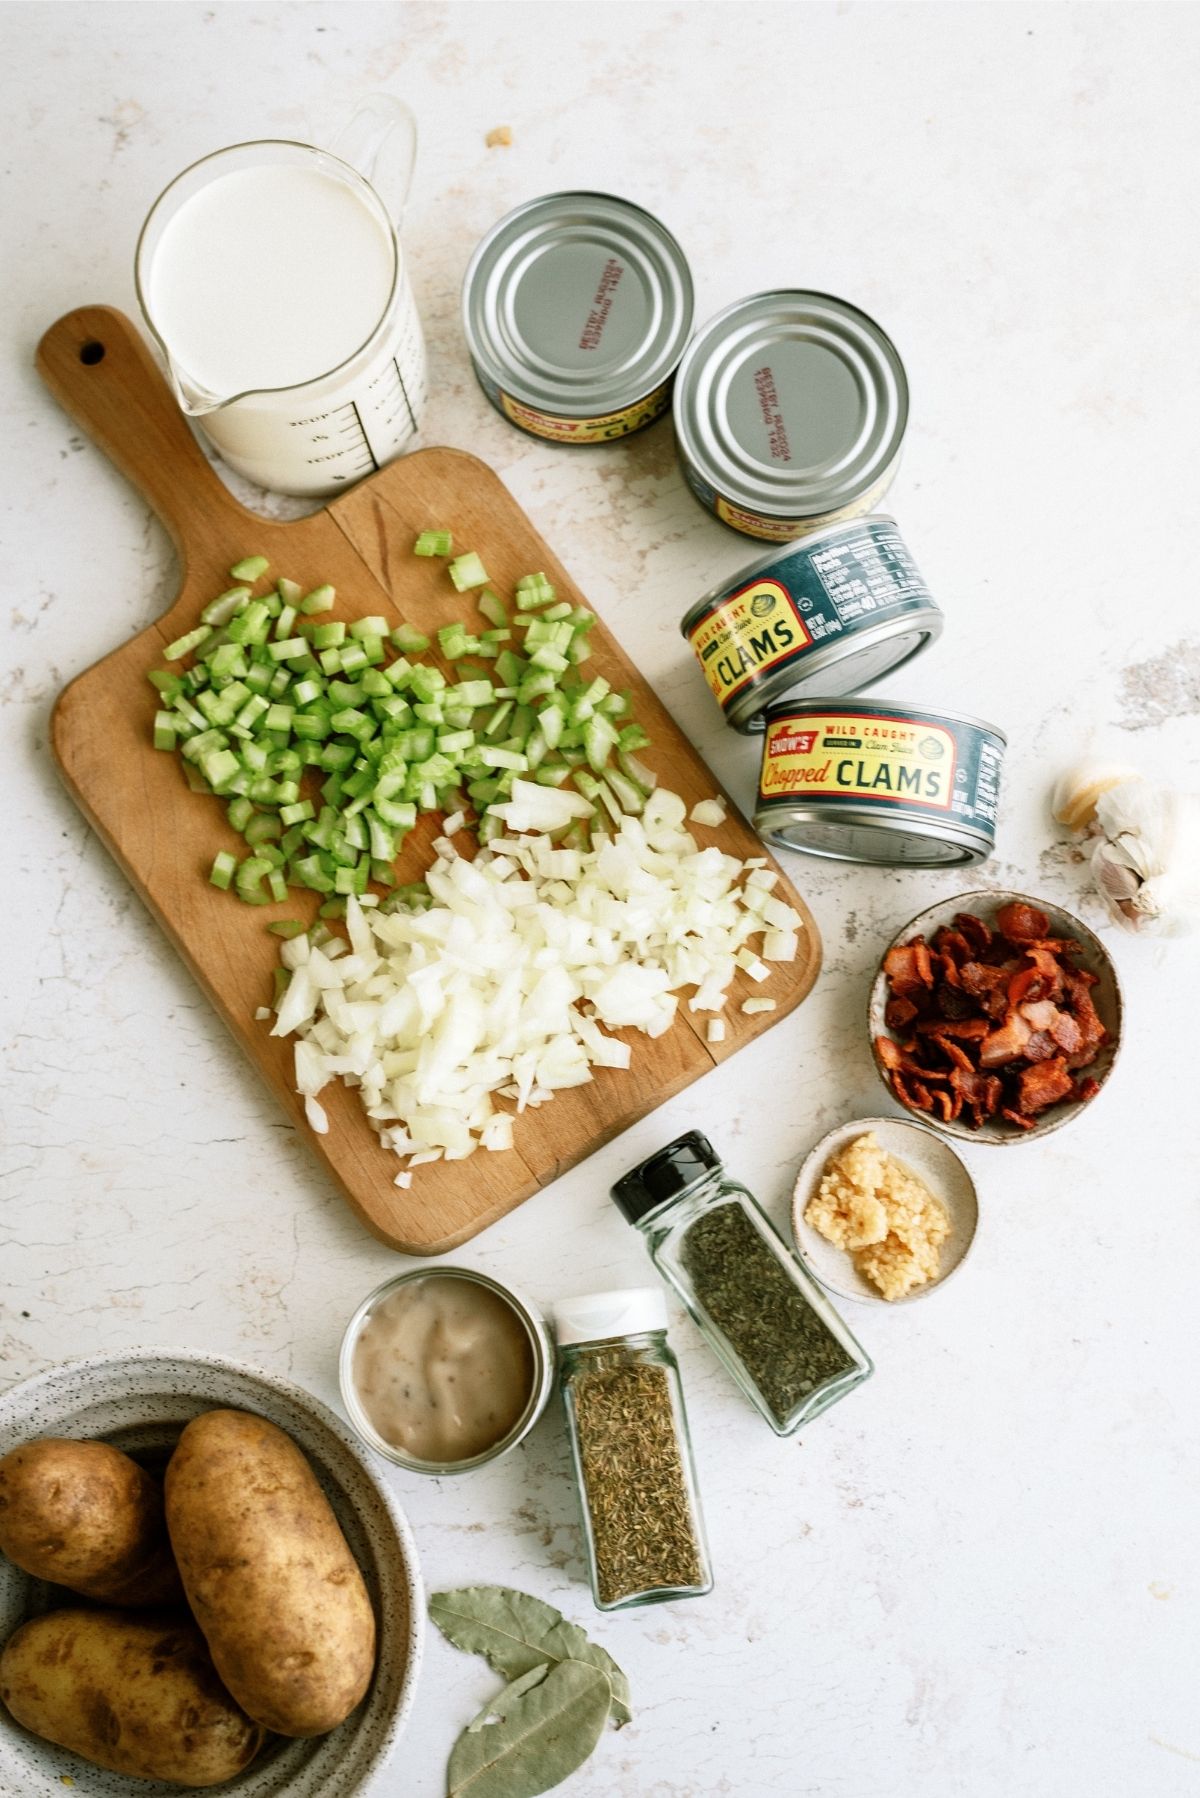 Ingredients for Slow Cooker New England Clam Chowder